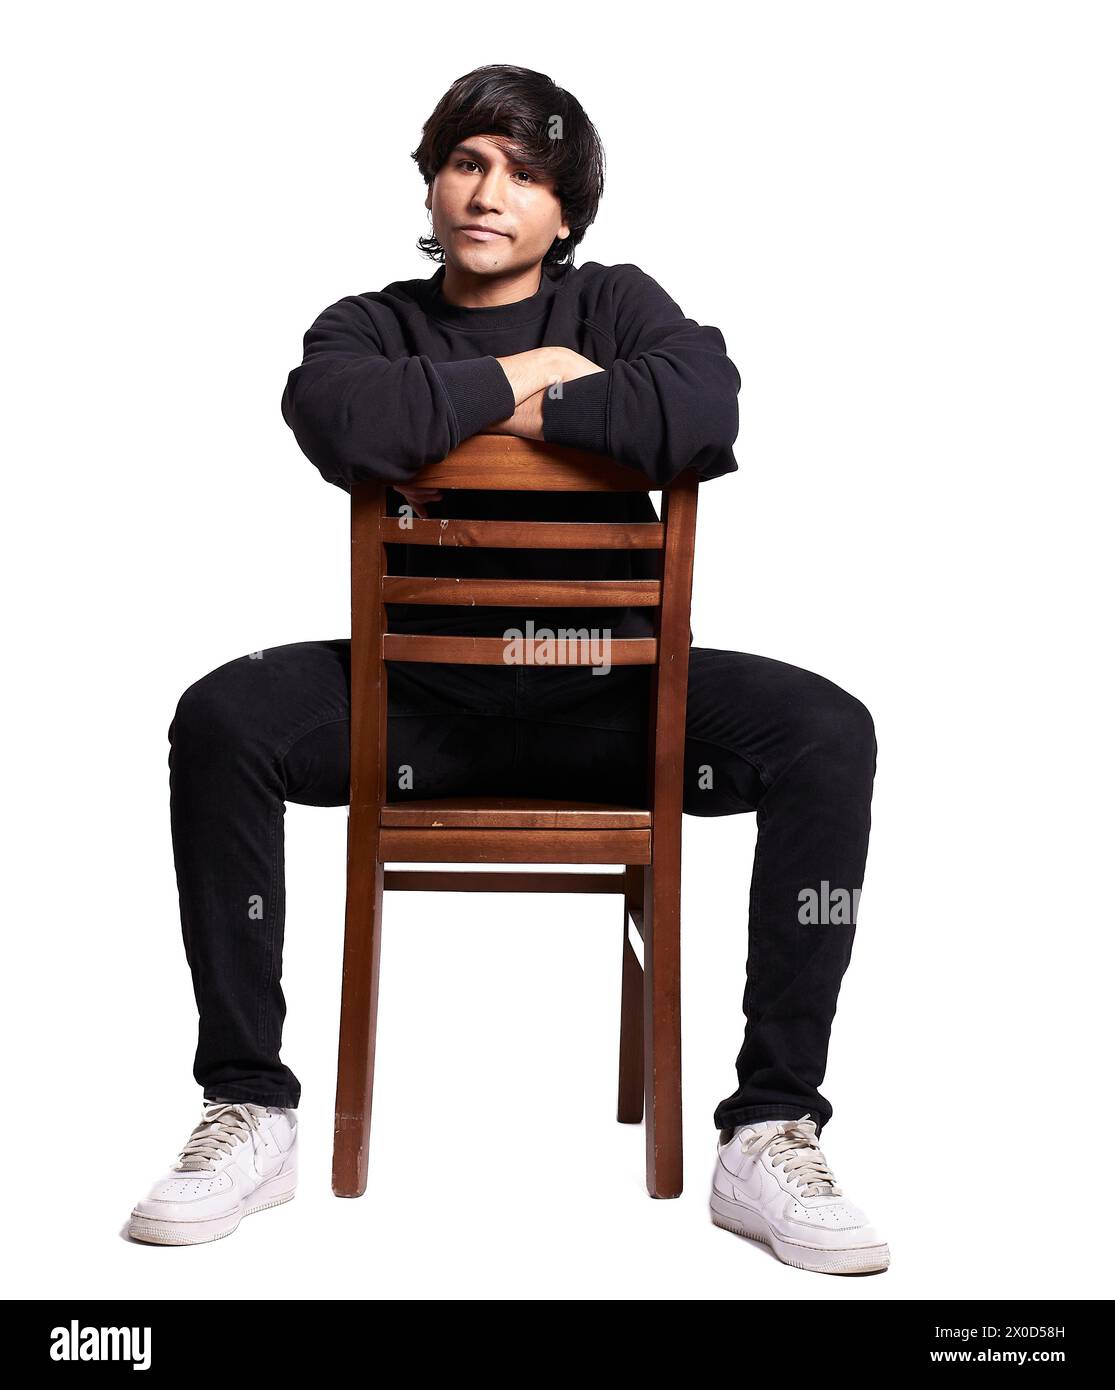 A man is sitting on a wooden chair with his arms crossed. He is wearing a black shirt and black pants. The chair is brown and has wooden slats. The ma Stock Photo